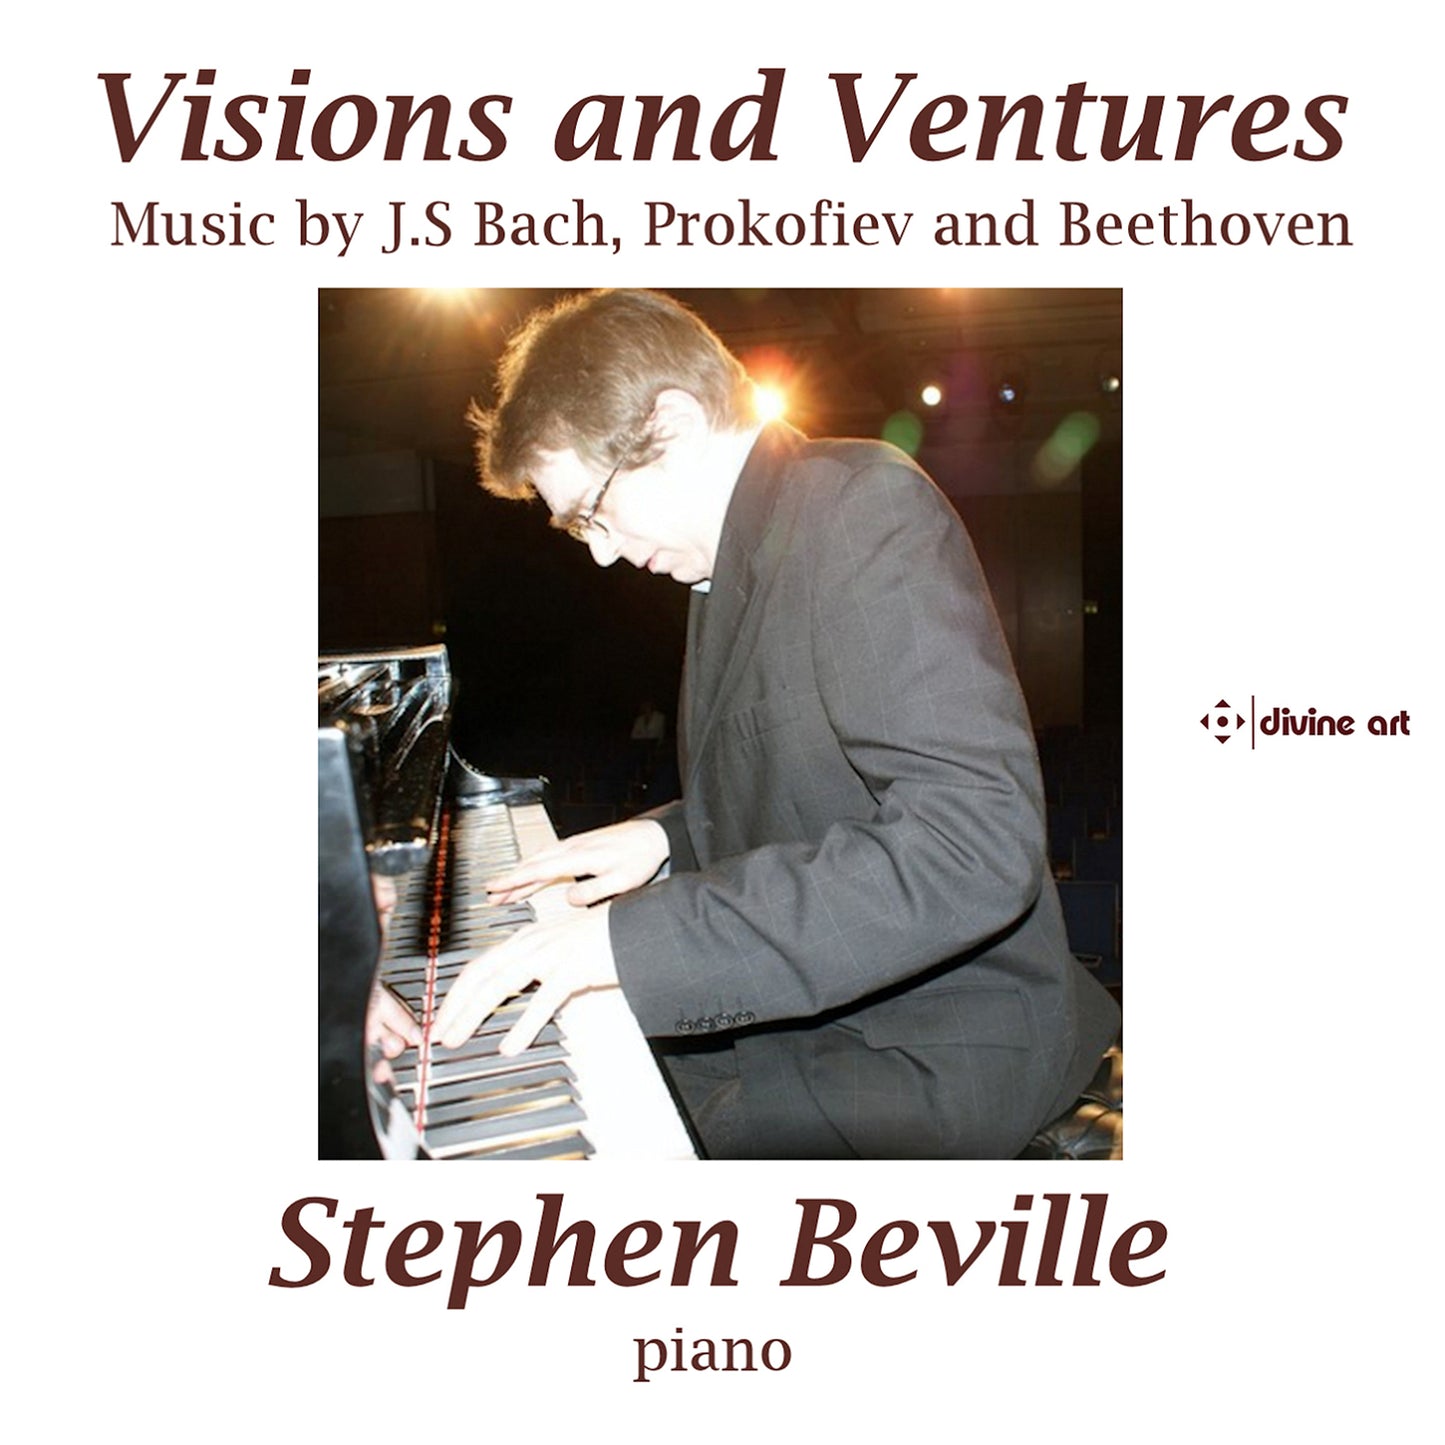 Visions and Ventures / Beville